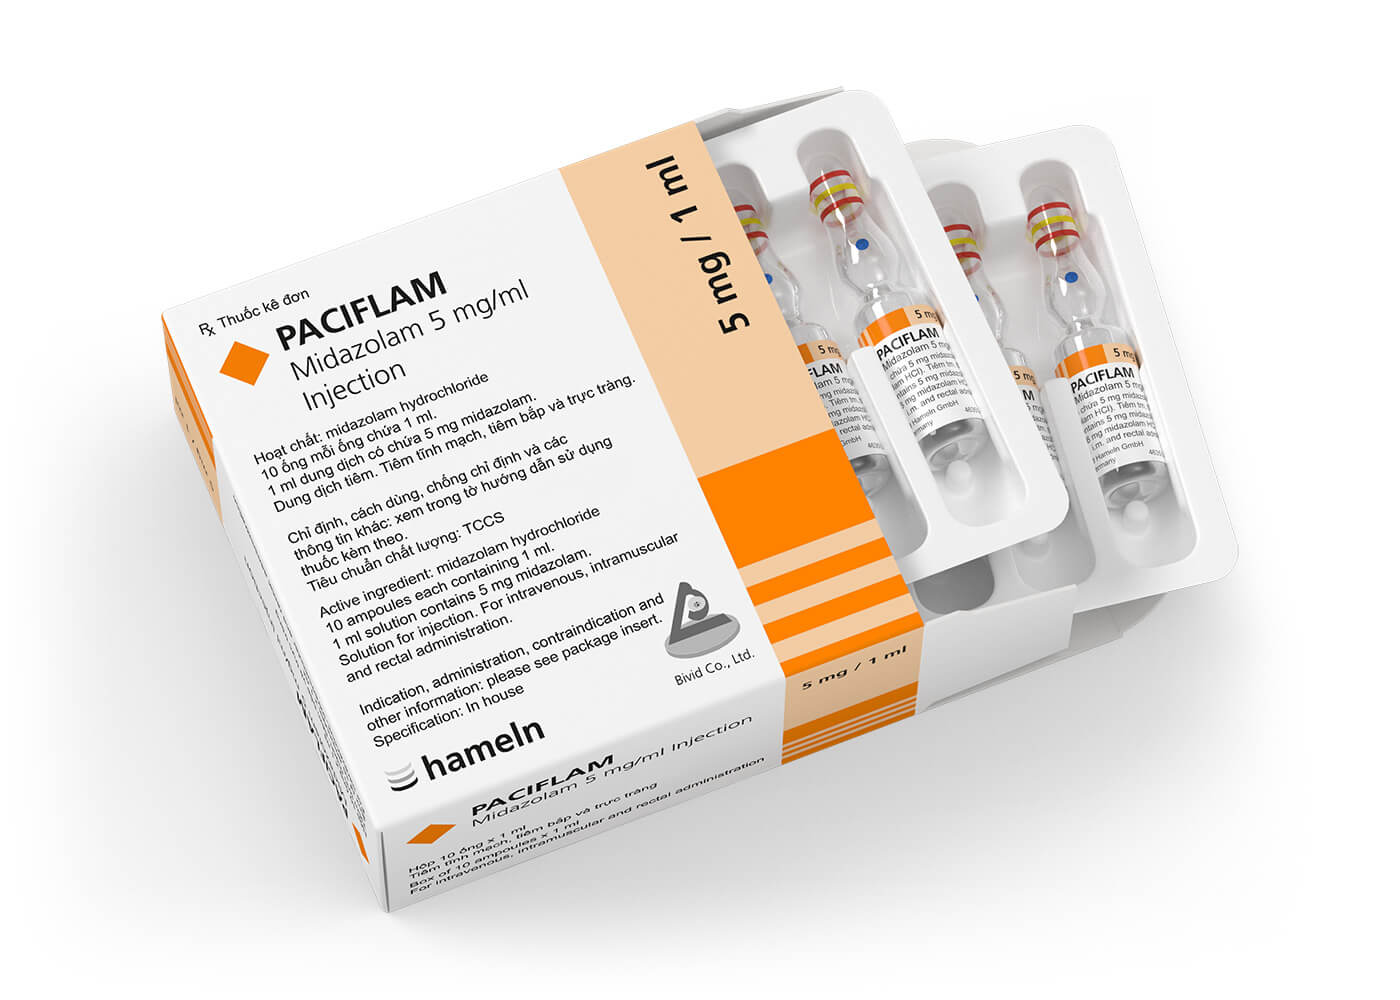 Midazolam_Paciflam_VN_5_mg-ml_in_1_ml_Pack-Amp_10St_CM_2022-08